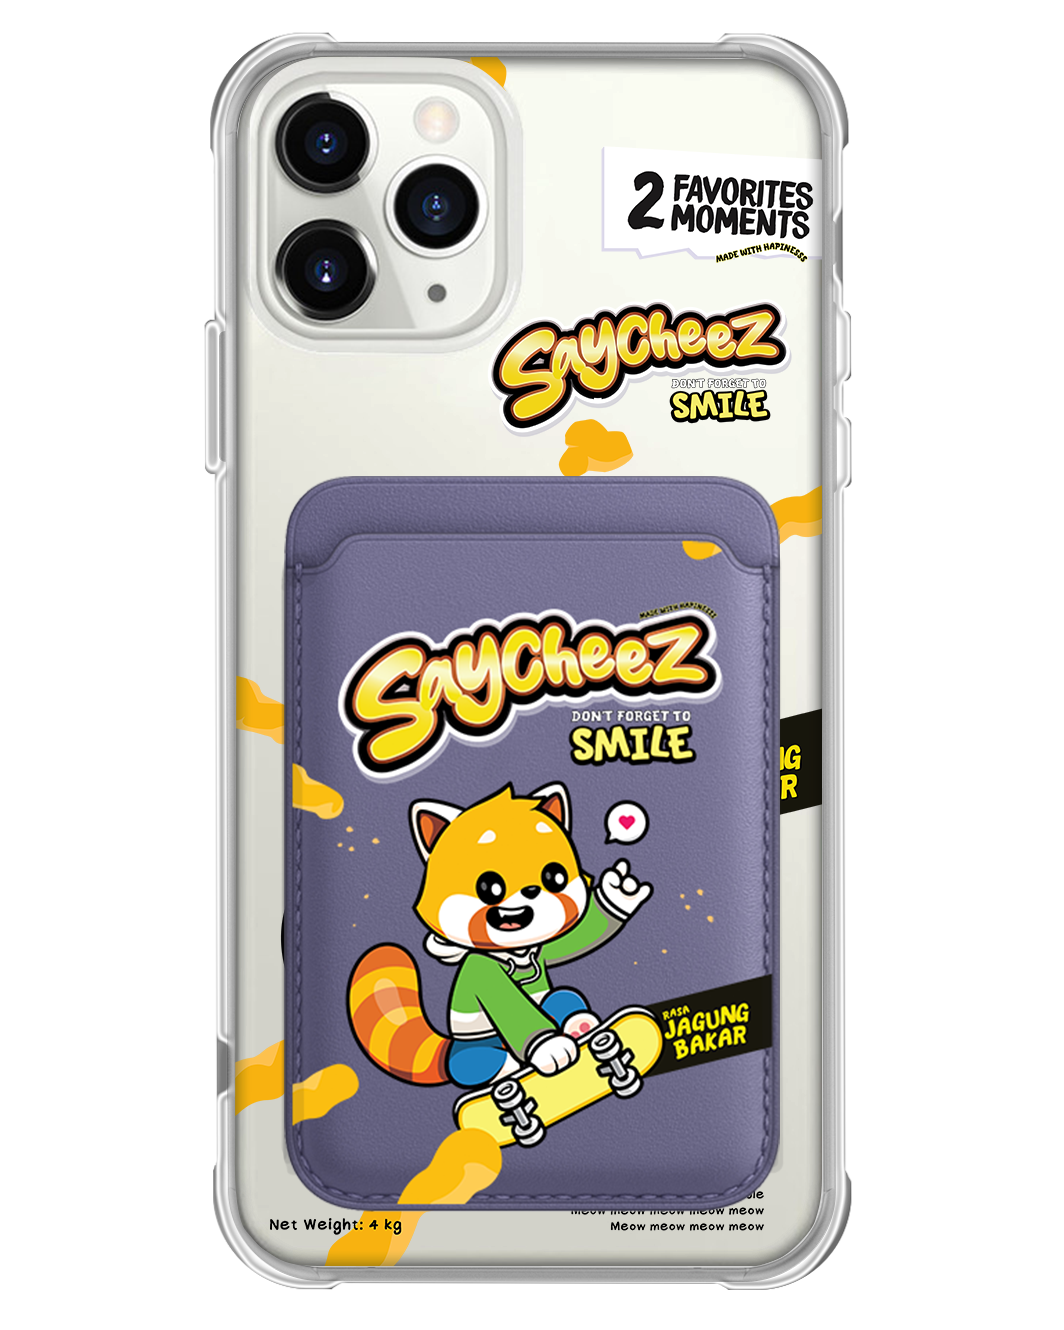 iPhone Magnetic Wallet Case - Saycheez